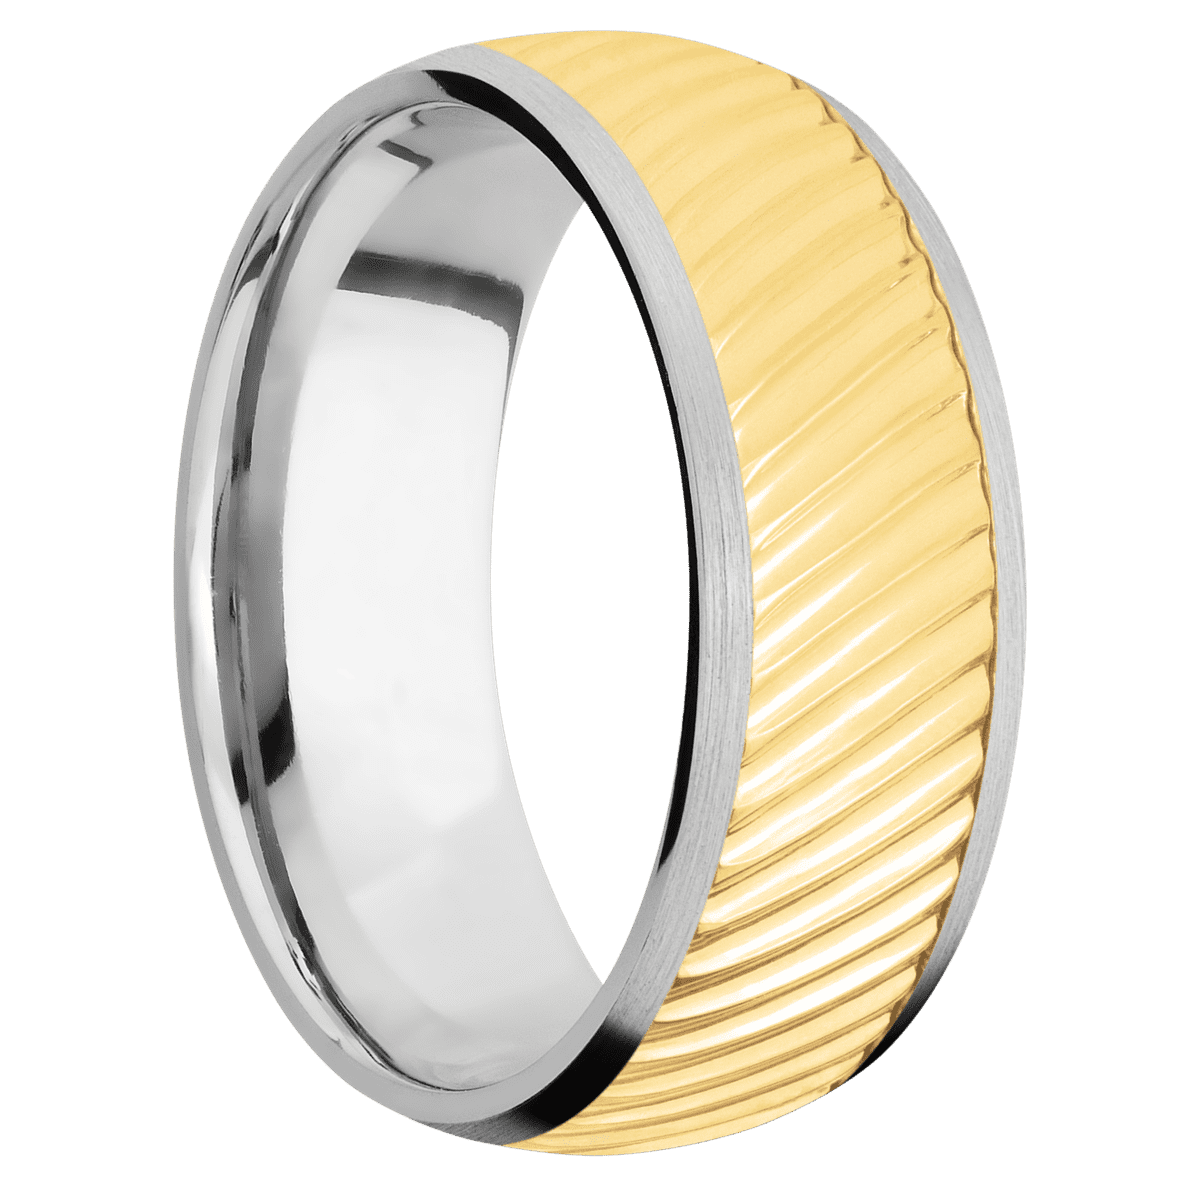 14K White Gold with Satin Finish and 14K Yellow Gold Inlay